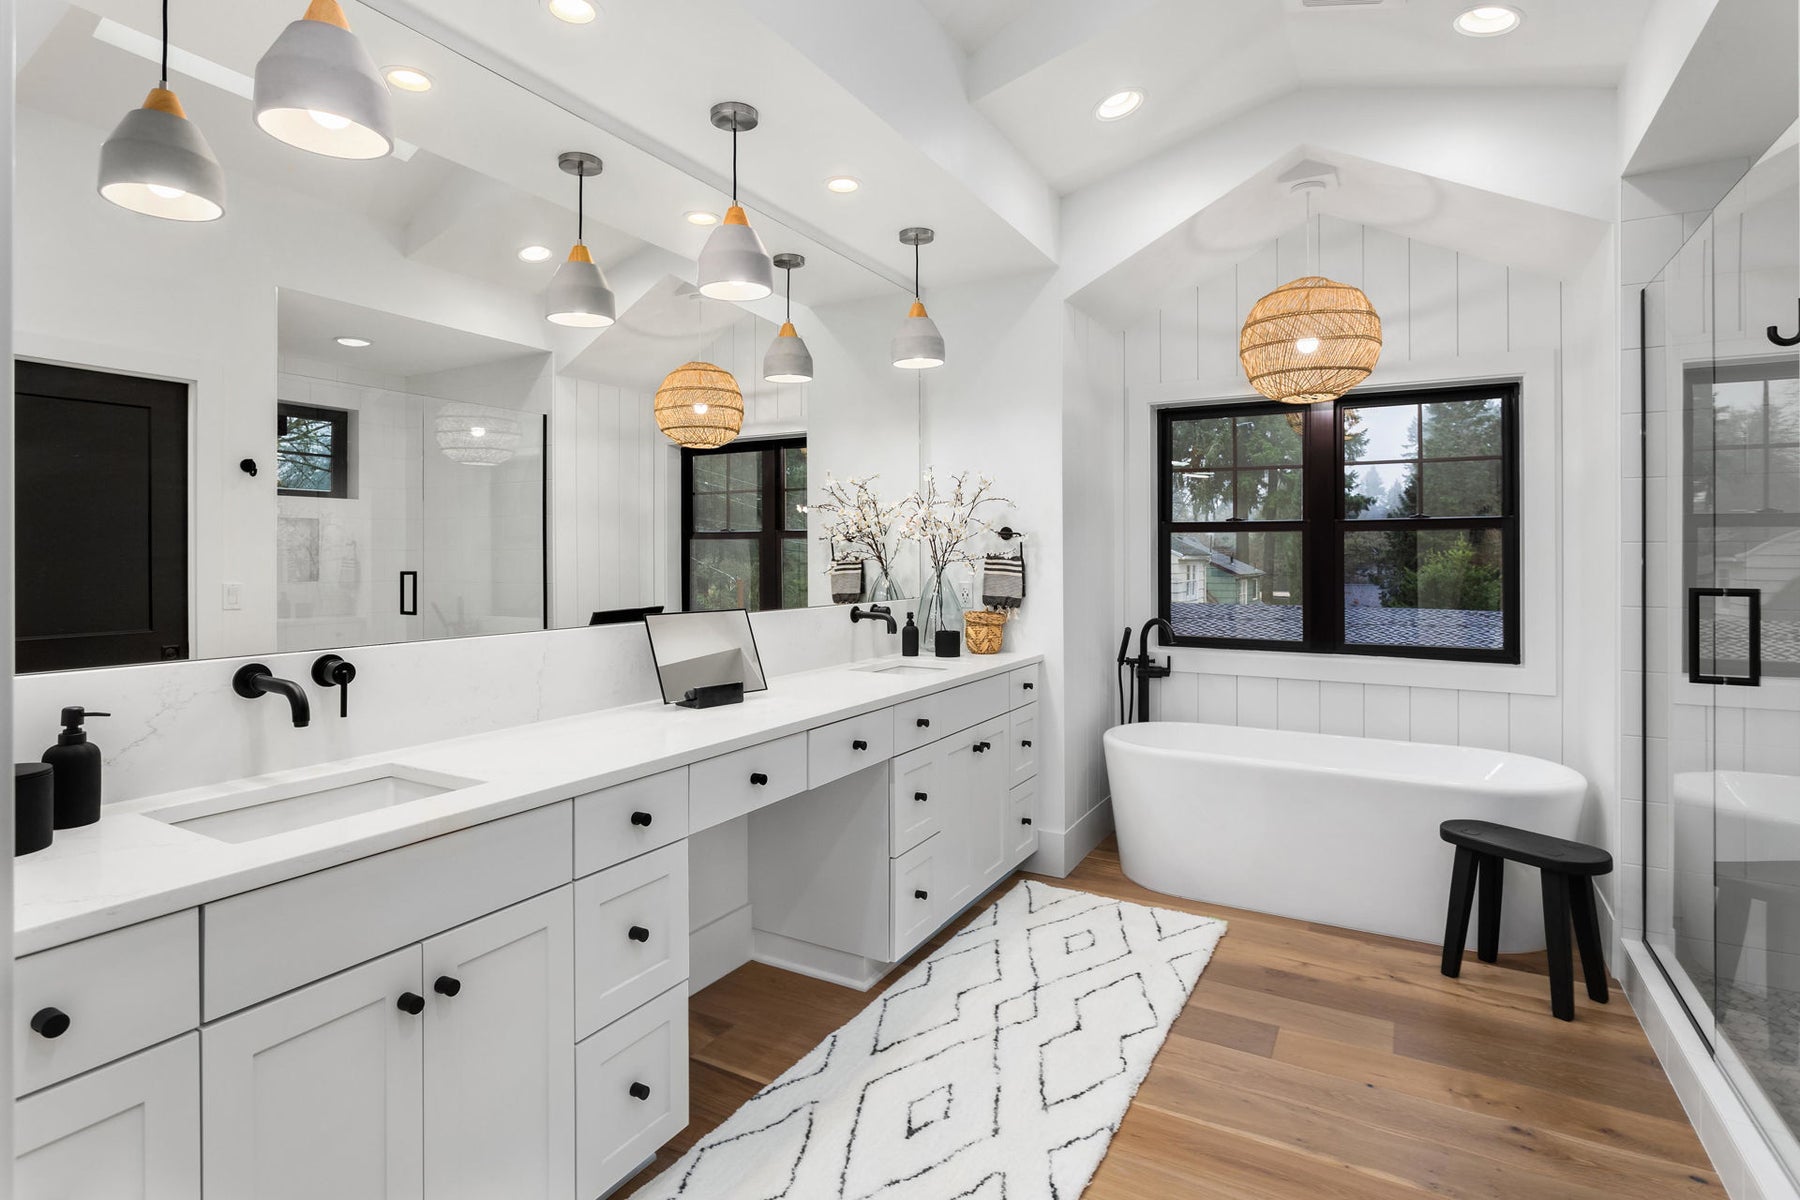 soft white ceiling lights in a kitchen